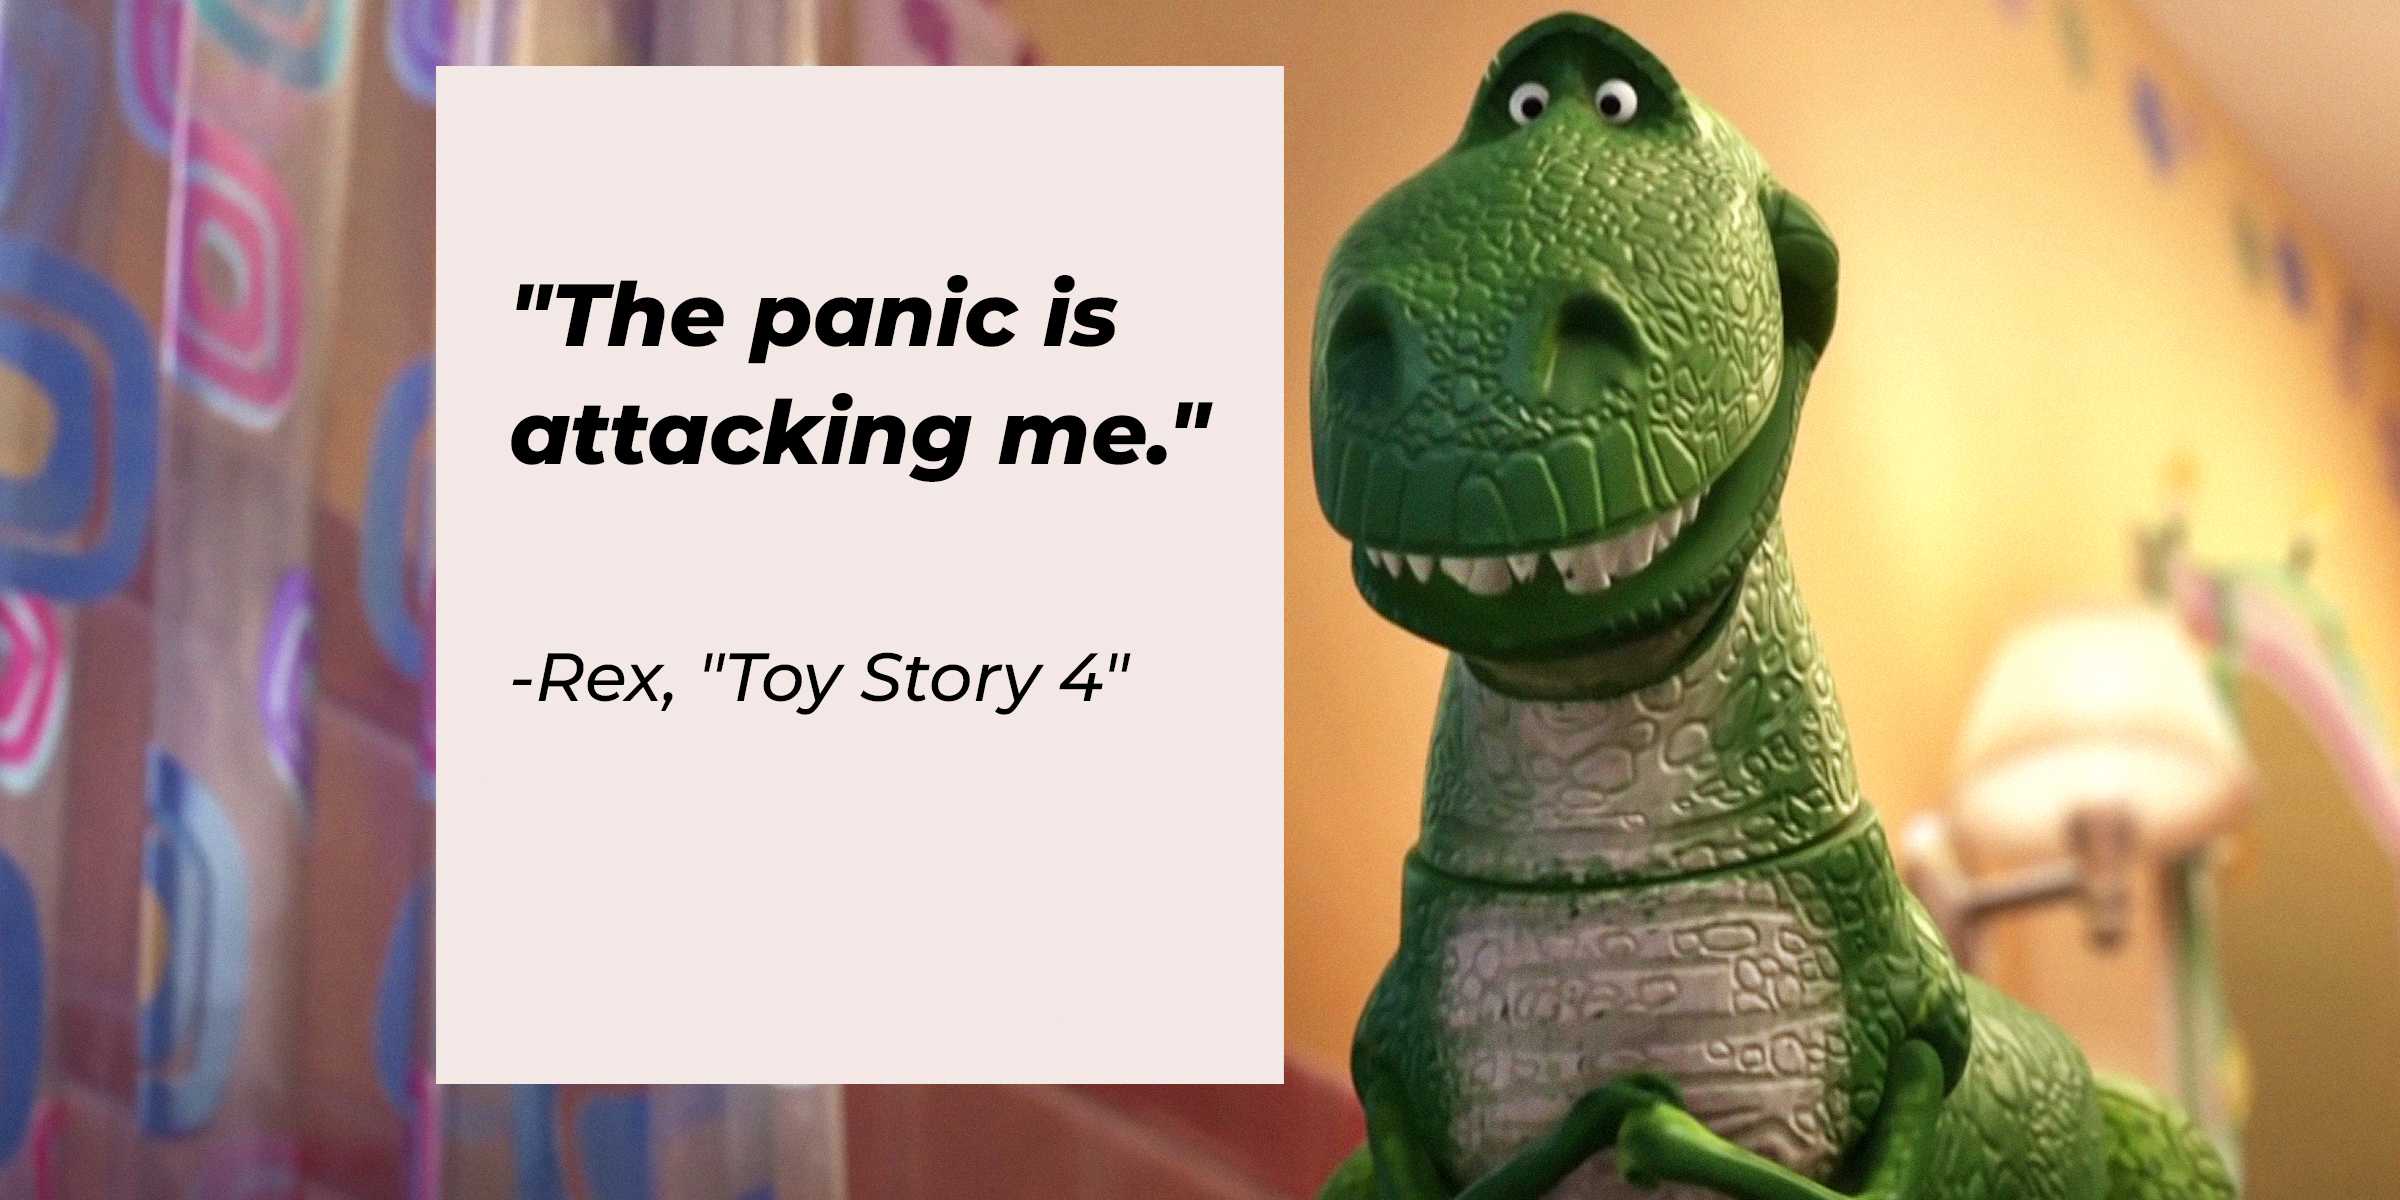 Rex's quote: "The panic is attacking me." | Source: Youtube.com/Pixar